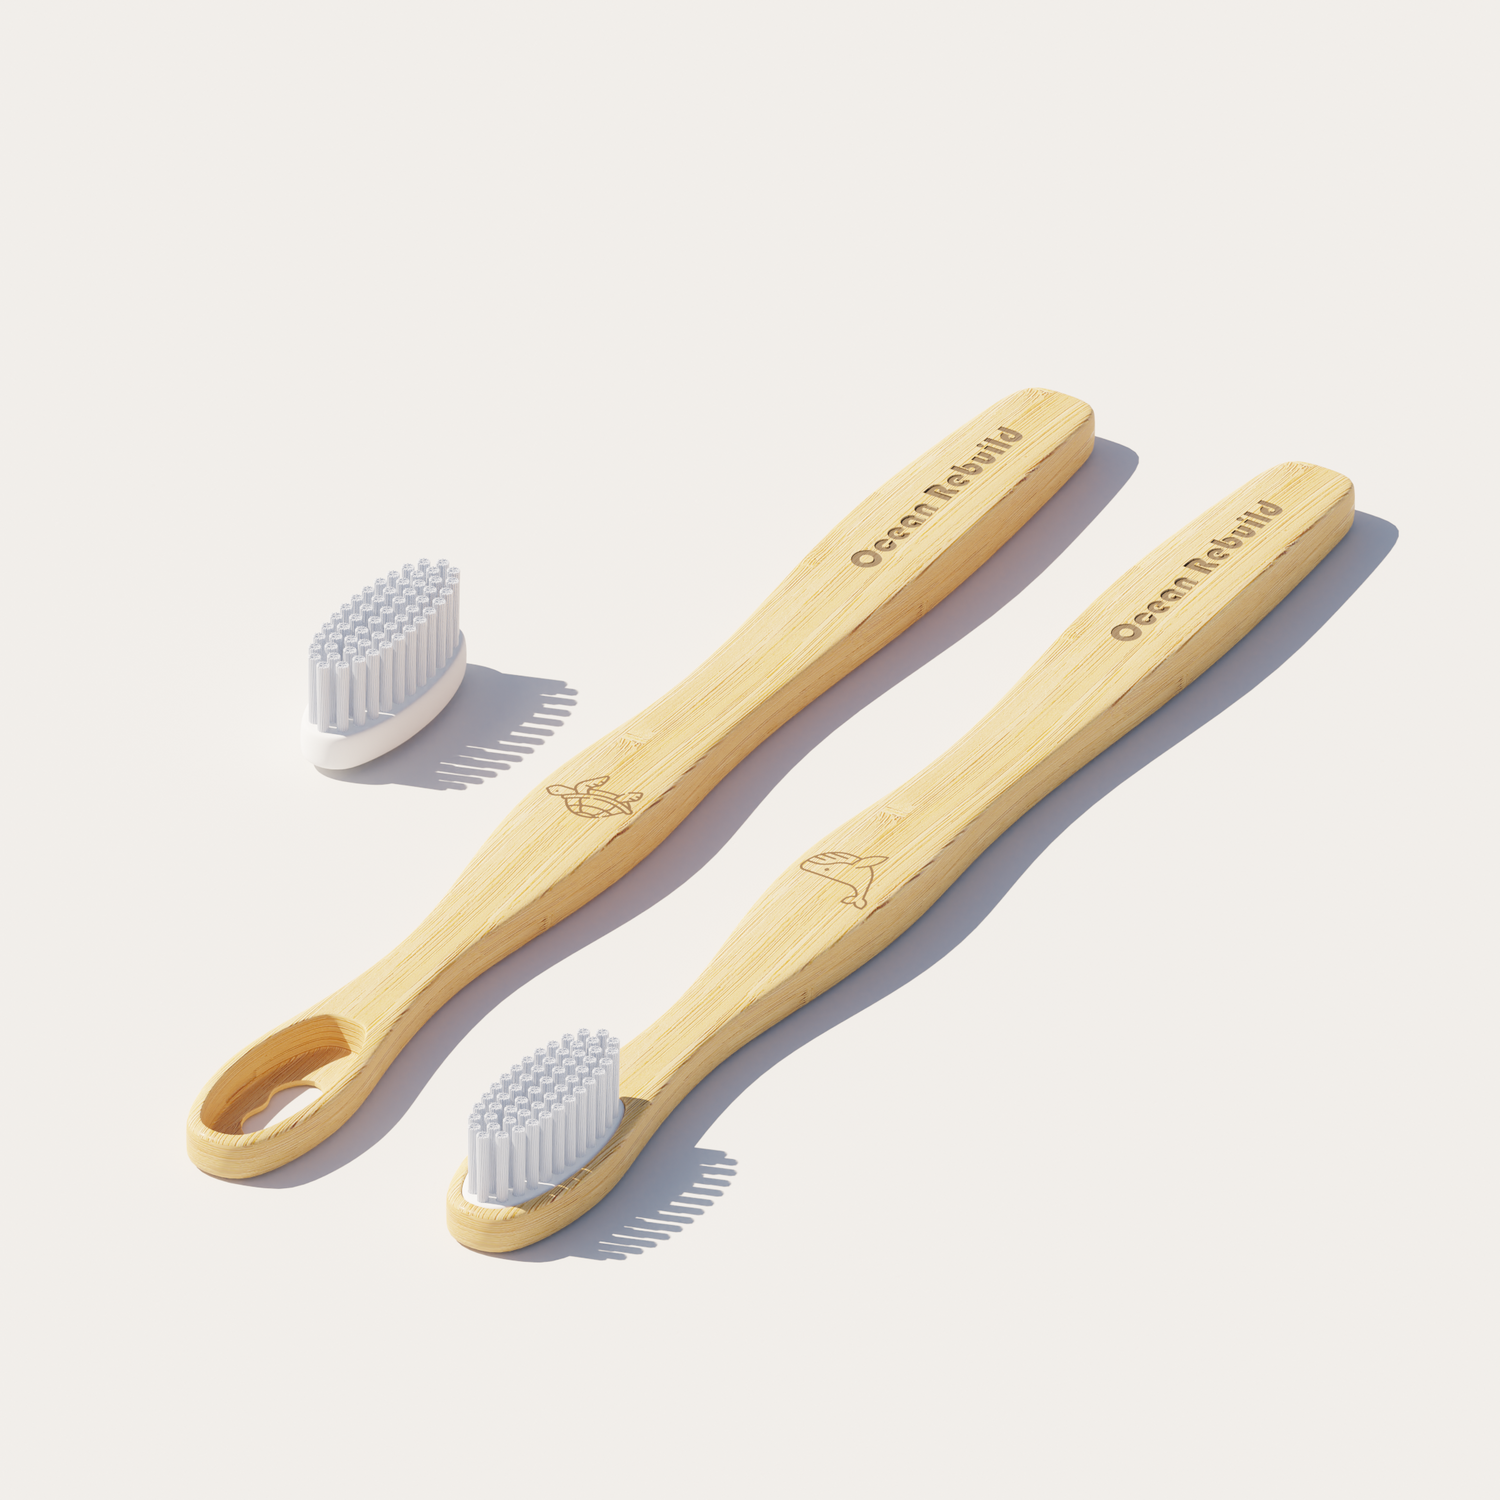 Render Ocean Rebuild Toothbrush with removable bristles made from bamboo